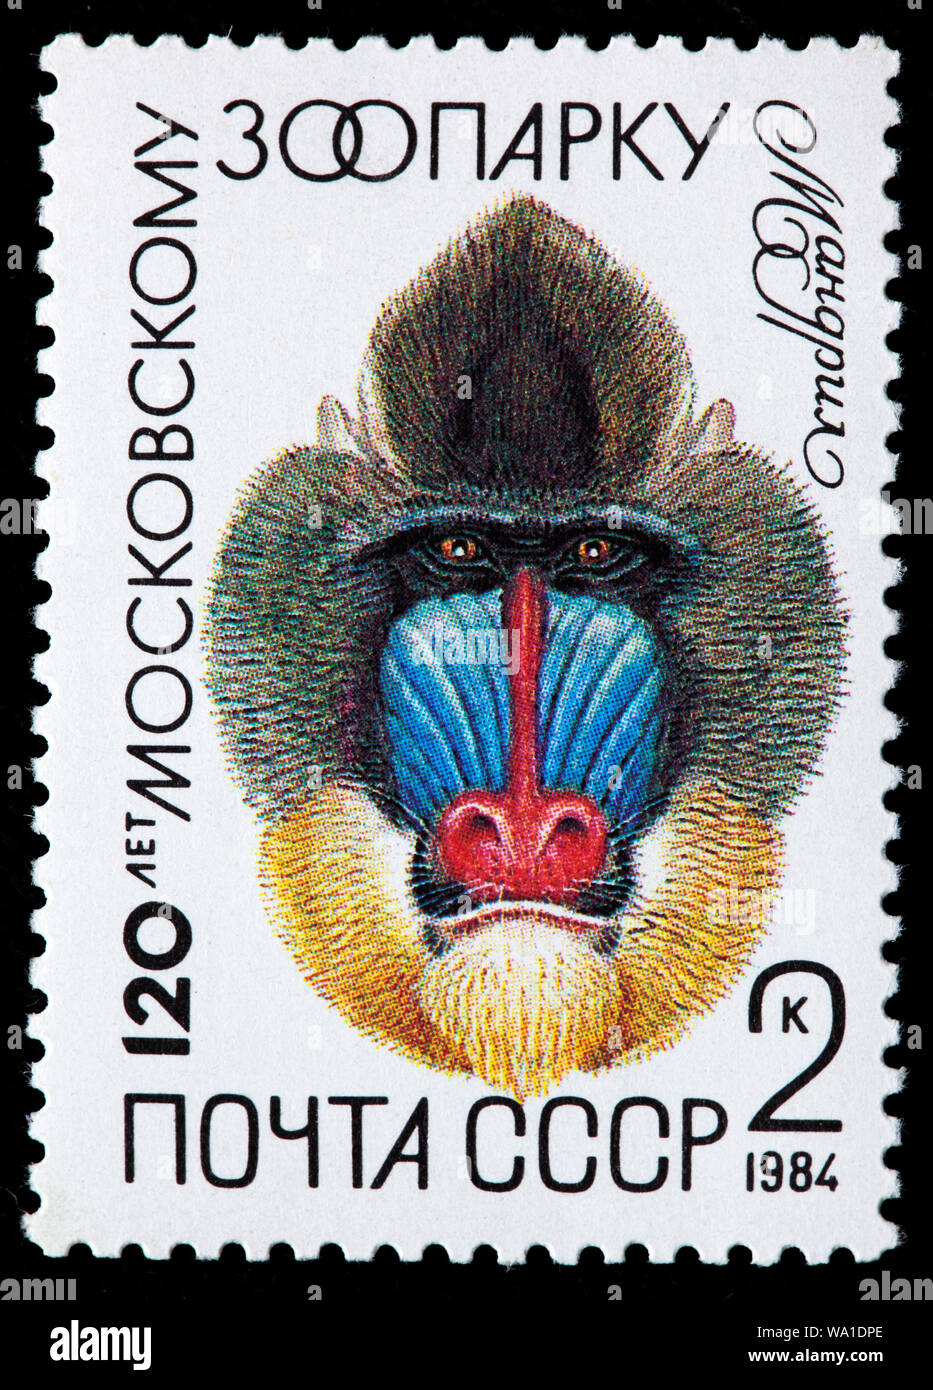 Mandrillus sphinx, Mandrill, primate, Old World monkey, 120th Anniversary of Moscow Zoo, postage stamp, Russia, USSR, 1984 Stock Photo